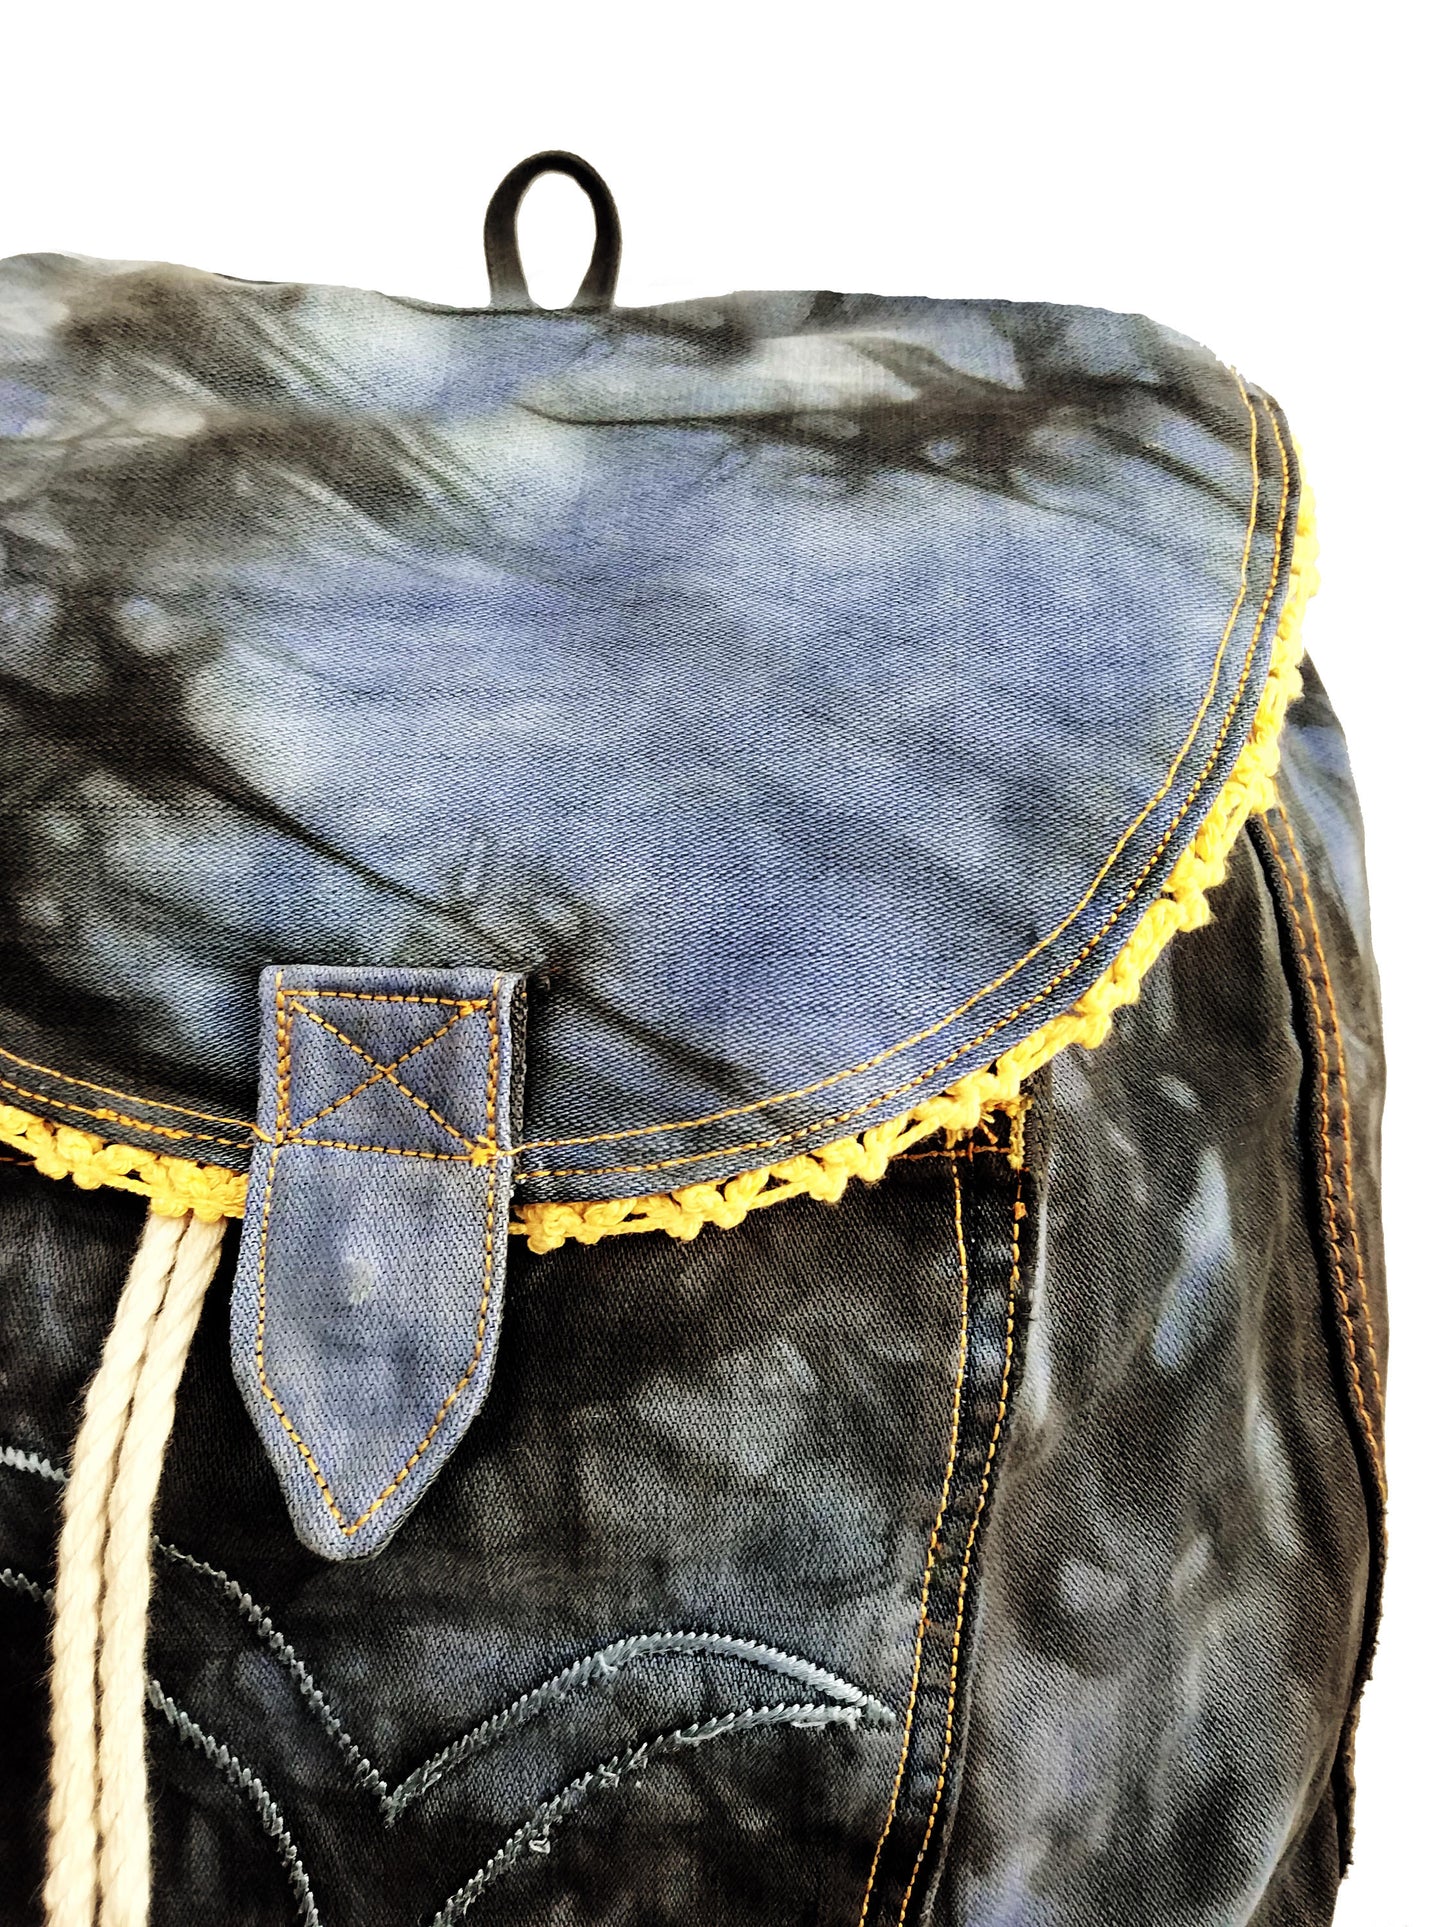 My blue denim backpack daypack jeans bag sustainable clothing | recycled clothing vegan backpack